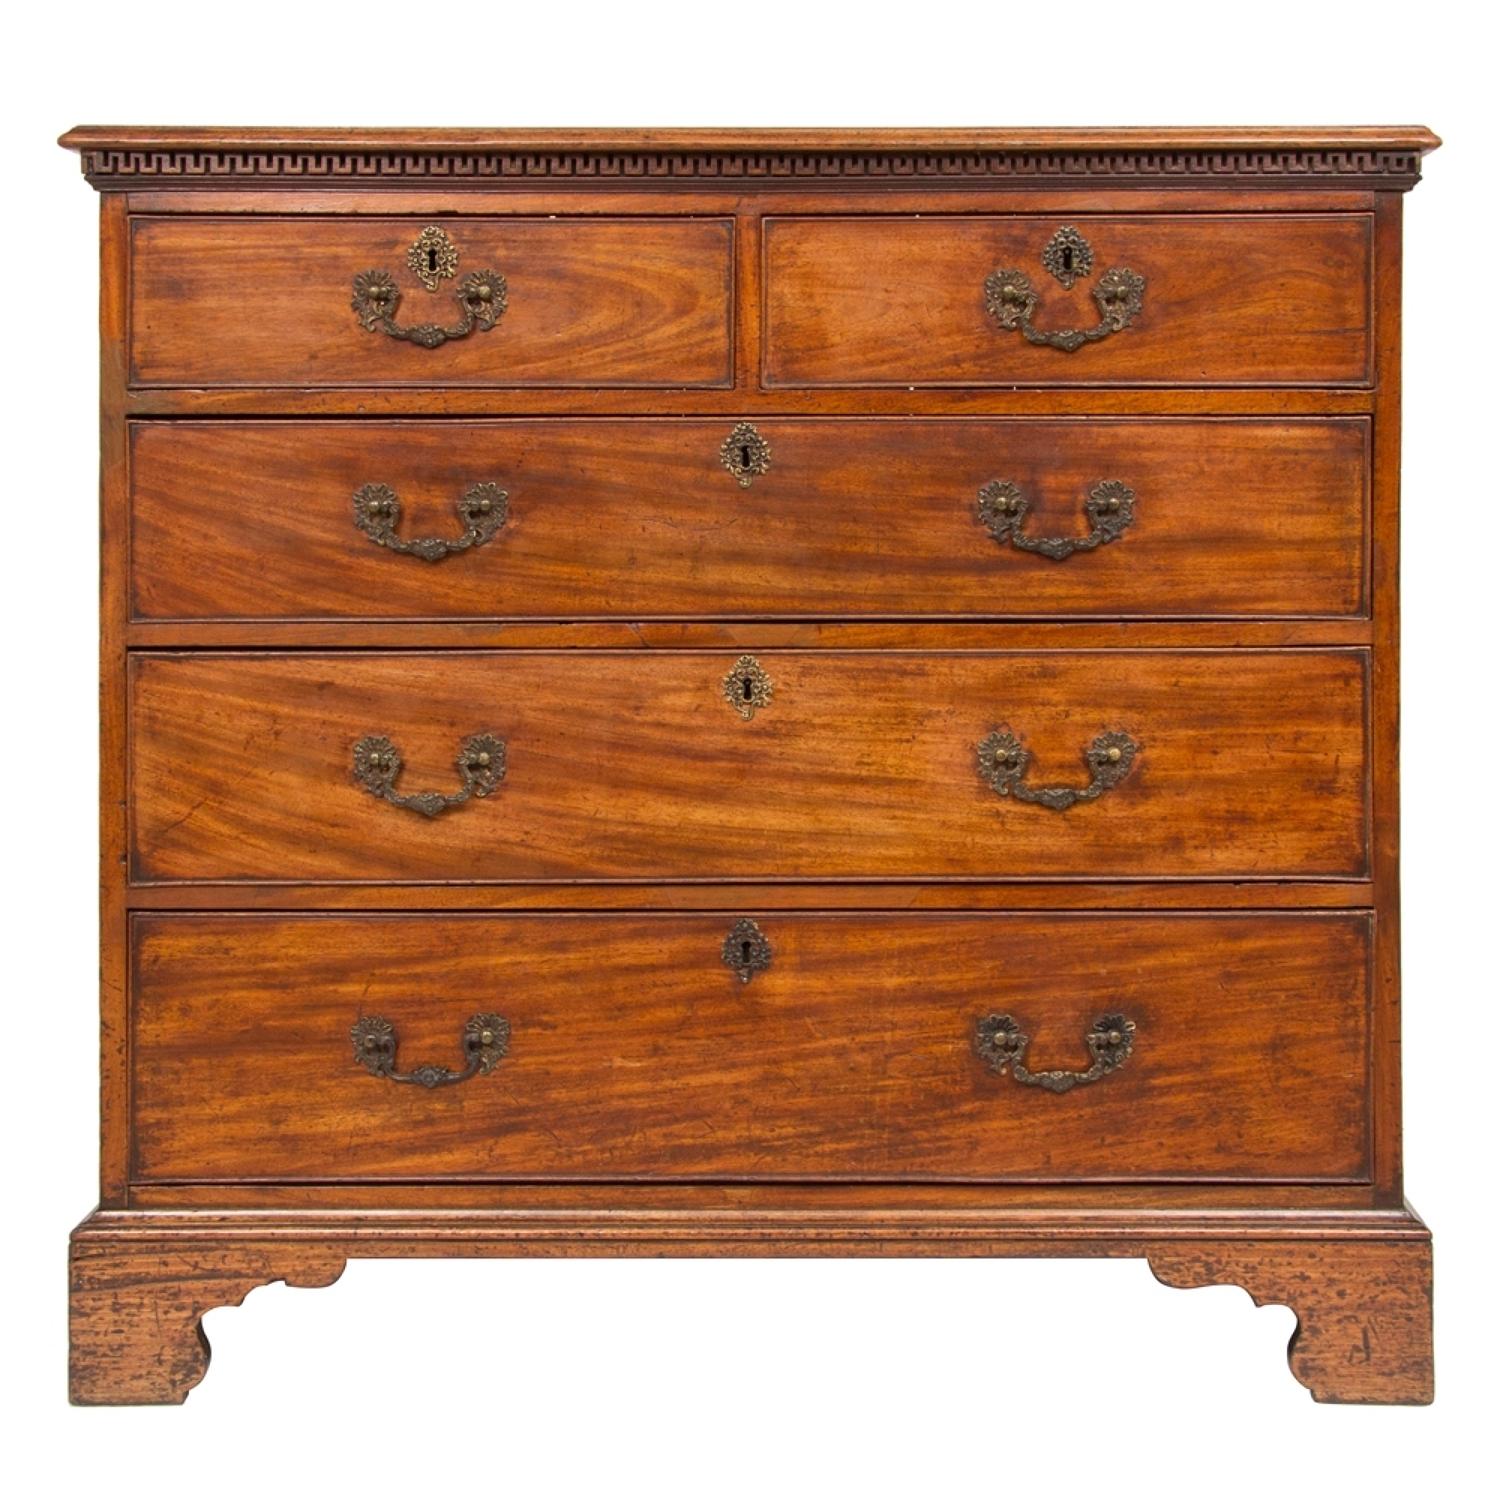 Early Georgian Mahogany Chest of Drawers